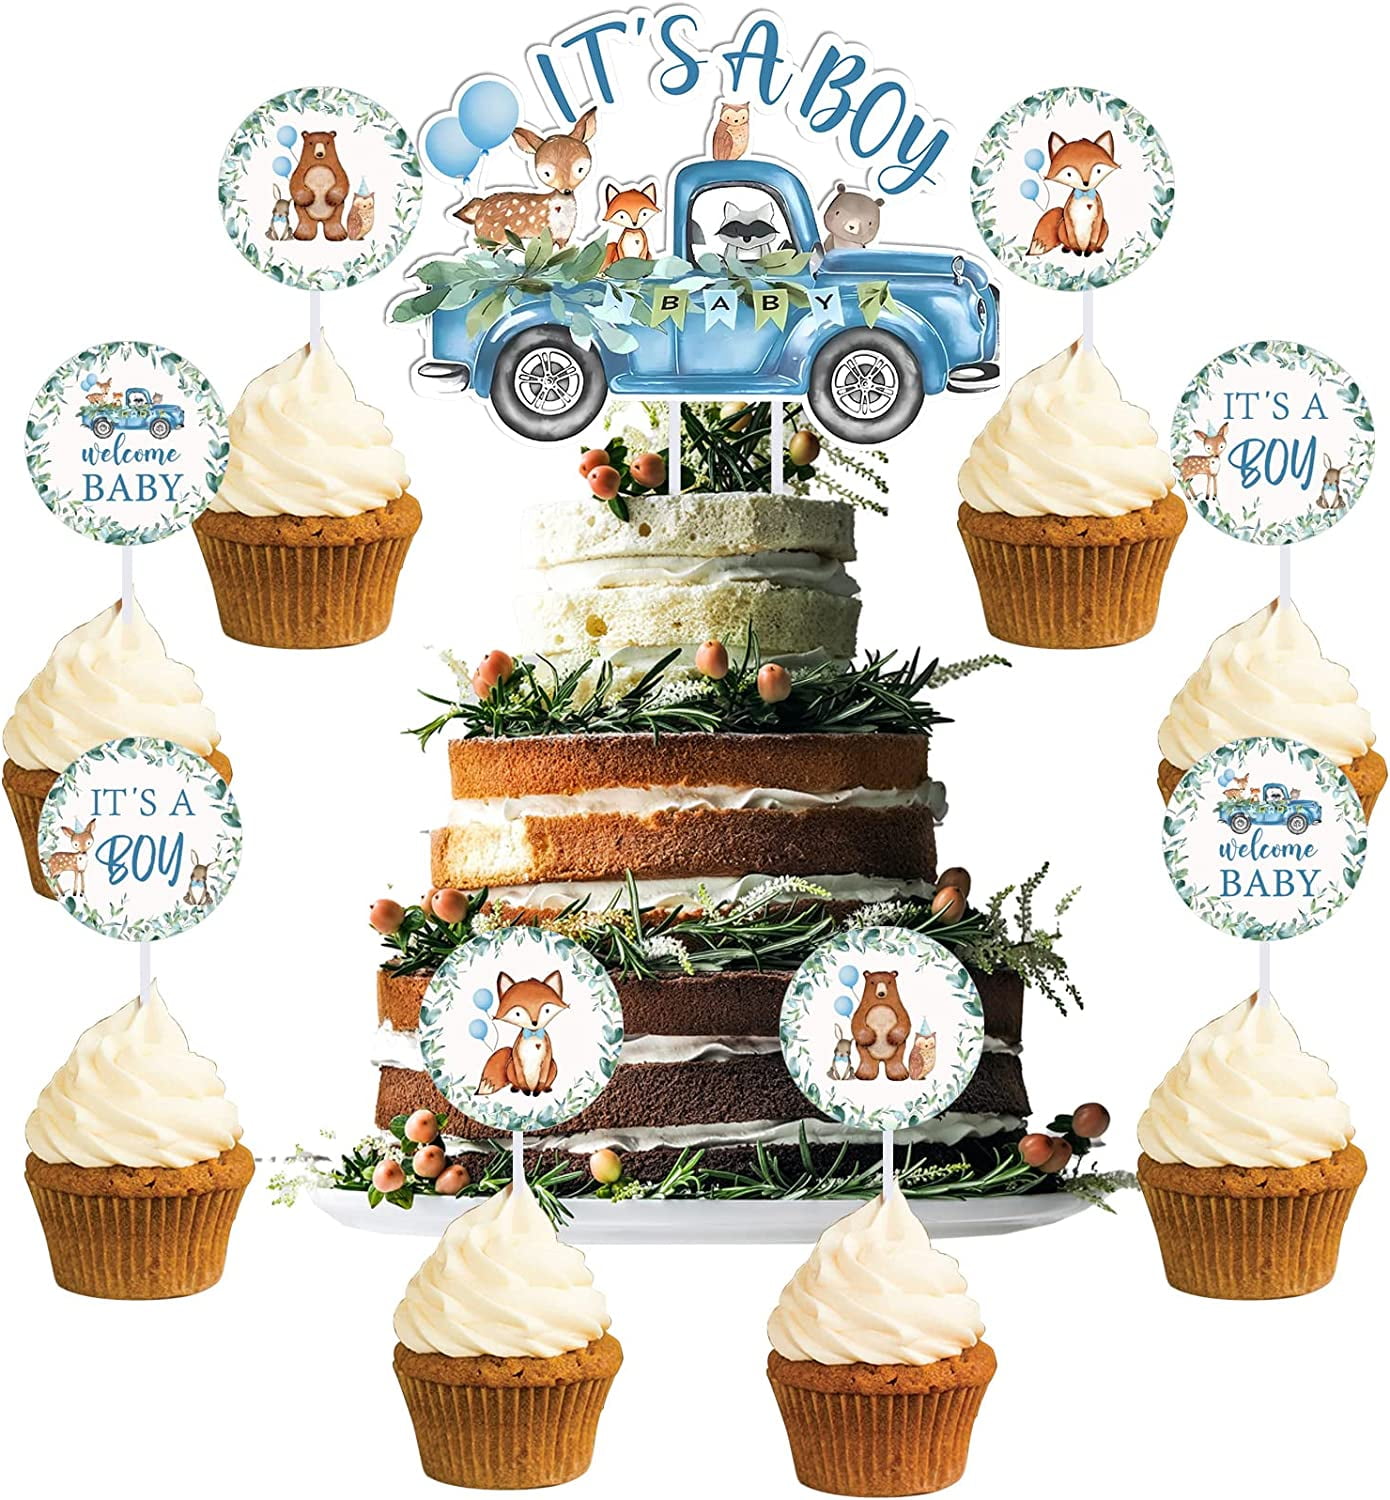 Woodland Animals Baby Shower Decorations for Boy, 25PCS Woodland Cupcake  Toppers, Its a Boy Cake Topper Woodland Creatures Fawn Animal Party  Supplies 